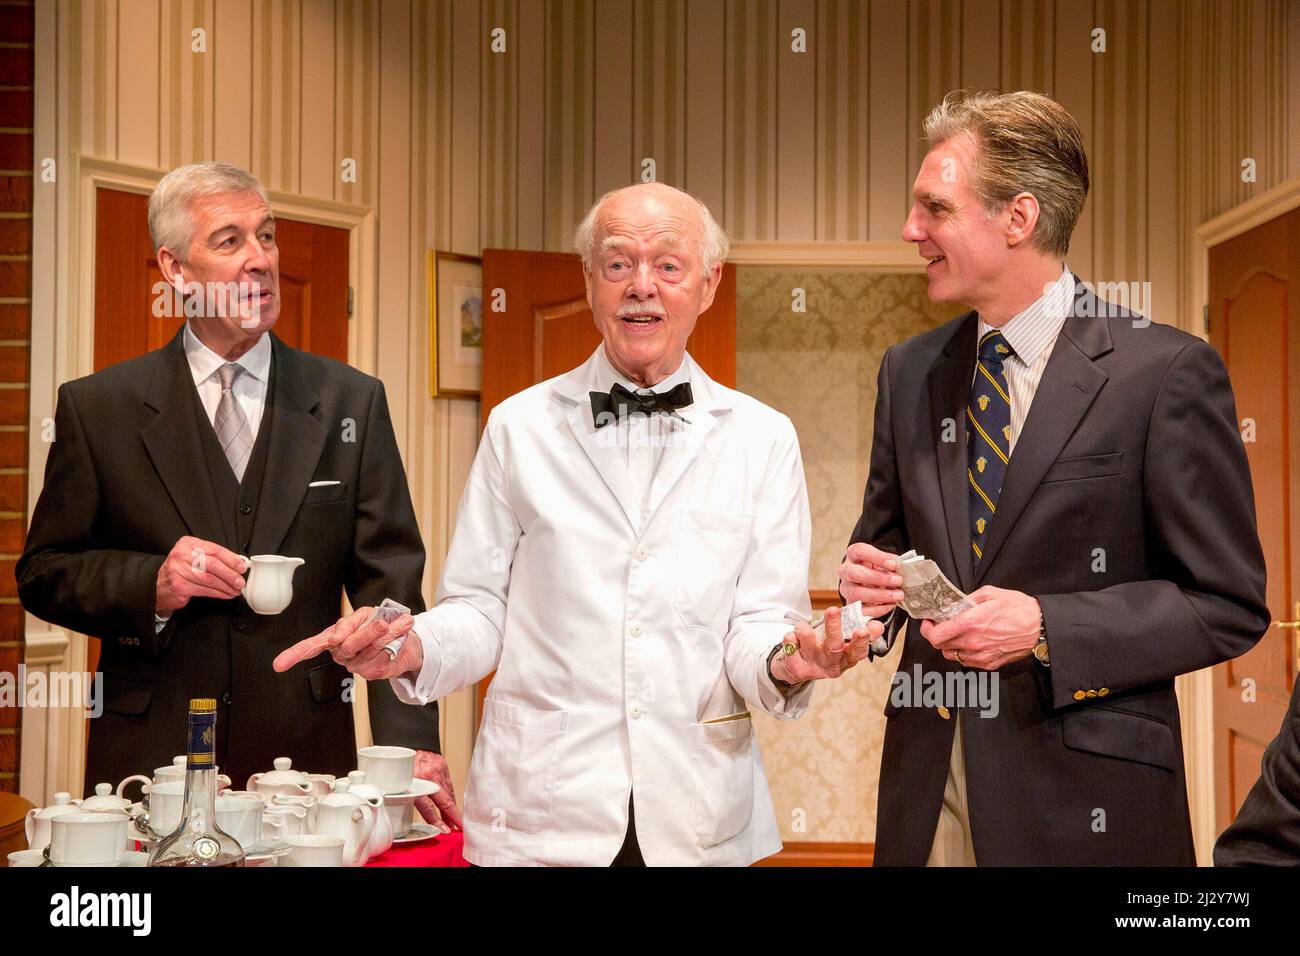 l-r: Jeffrey Holland (Manager), Ray Cooney (Waiter), Michael Praed (Richard Willey) in TWO INTO ONE by Ray Cooney at the Menier Chocolate Factory, London SE1  19/03/2014 design: Julie Godfrey  lighting: Paul Anderson  director: Ray Cooney Stock Photo